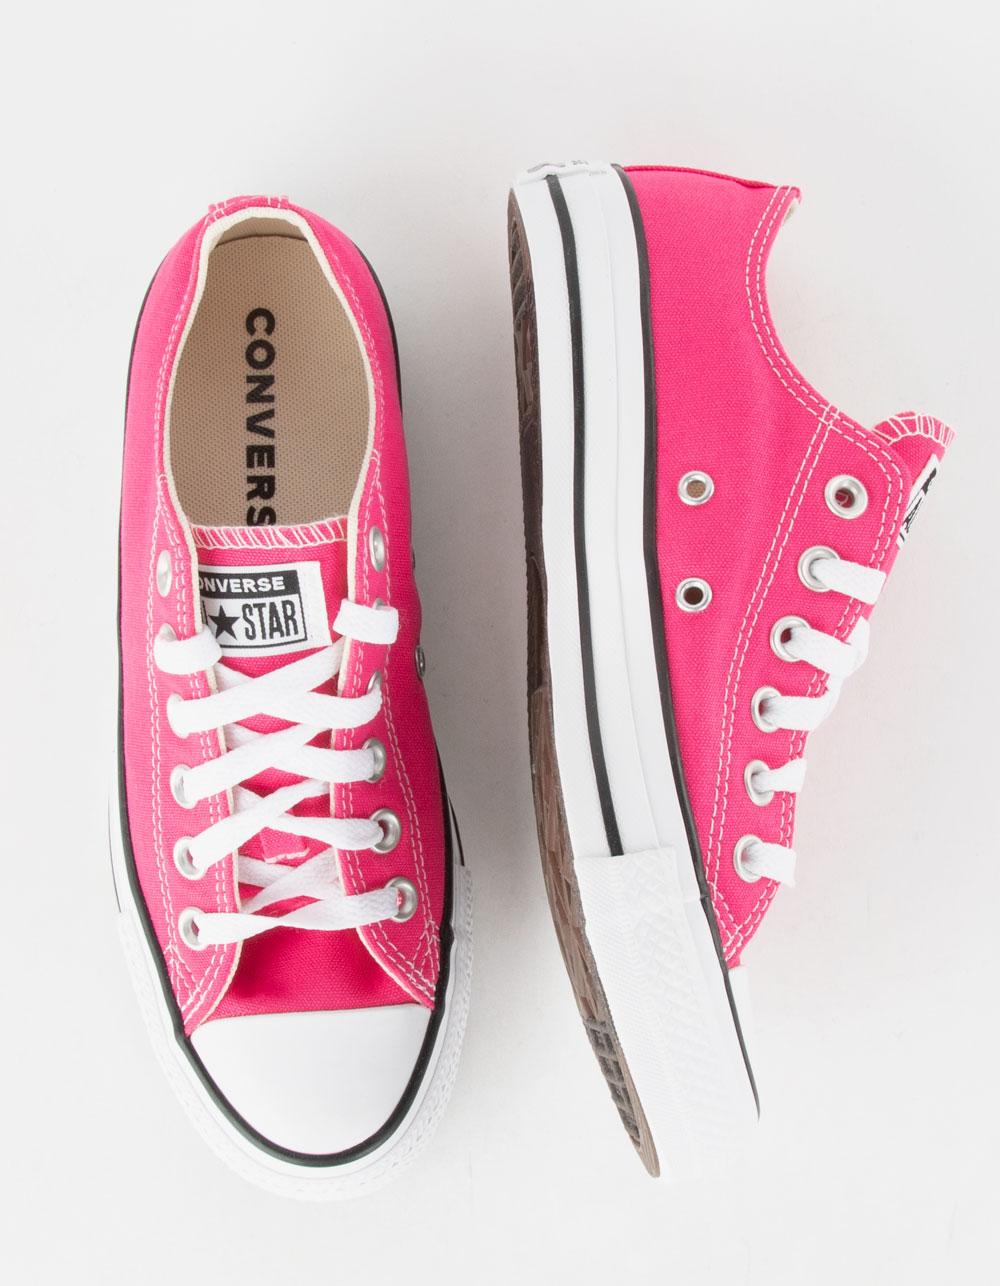 CONVERSE Chuck All Star Low Top Sneakers - HOT PINK |